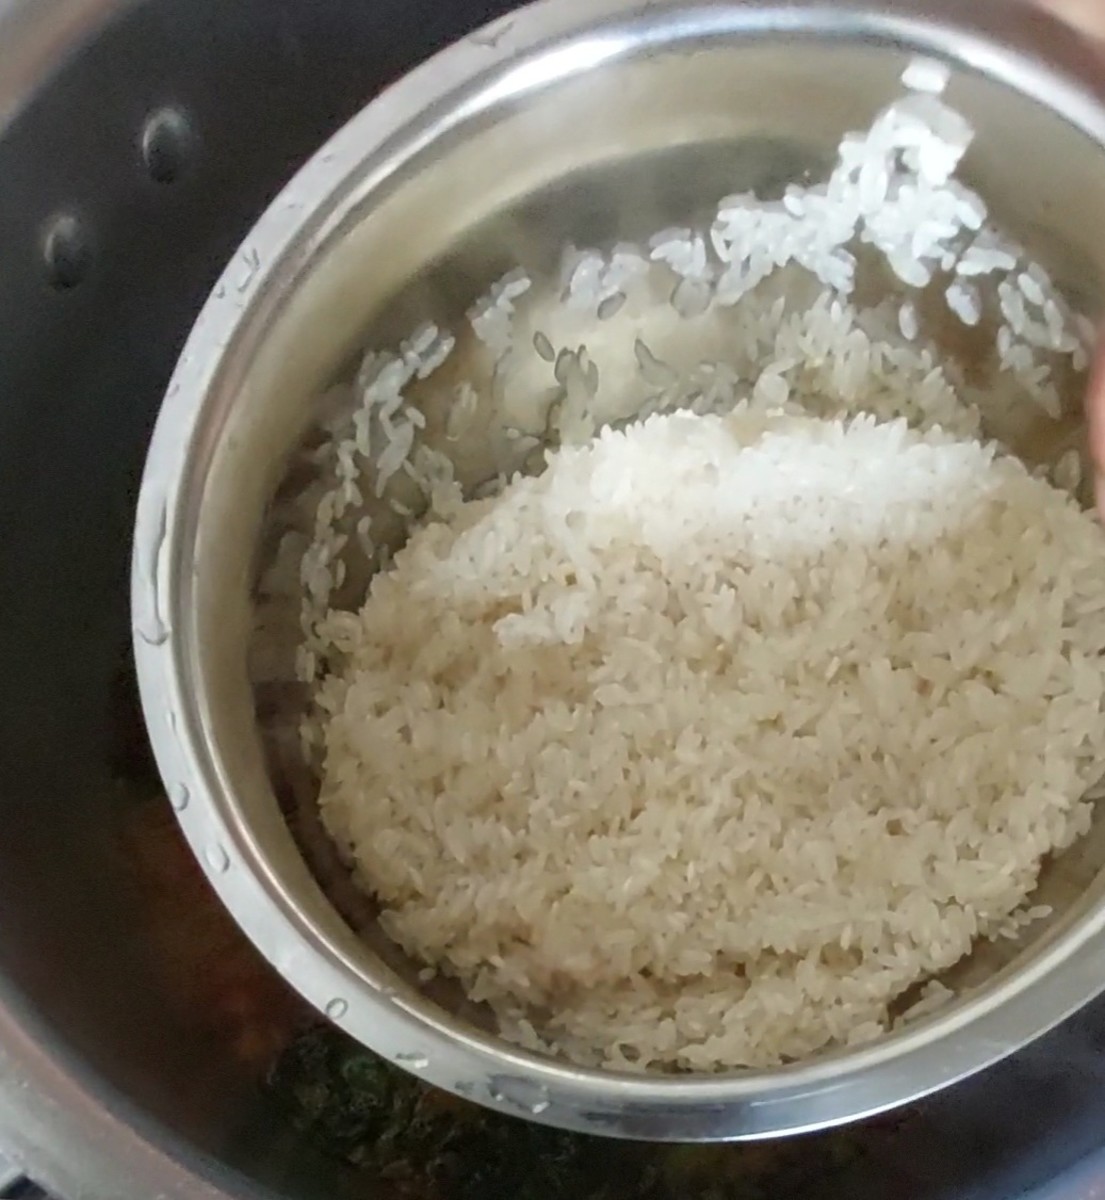 When the water starts boiling, add 1 cup of rinsed rice, mix well, close the lid of the cooker and take 3 whistles. Switch off the flame and let the pressure settle down.